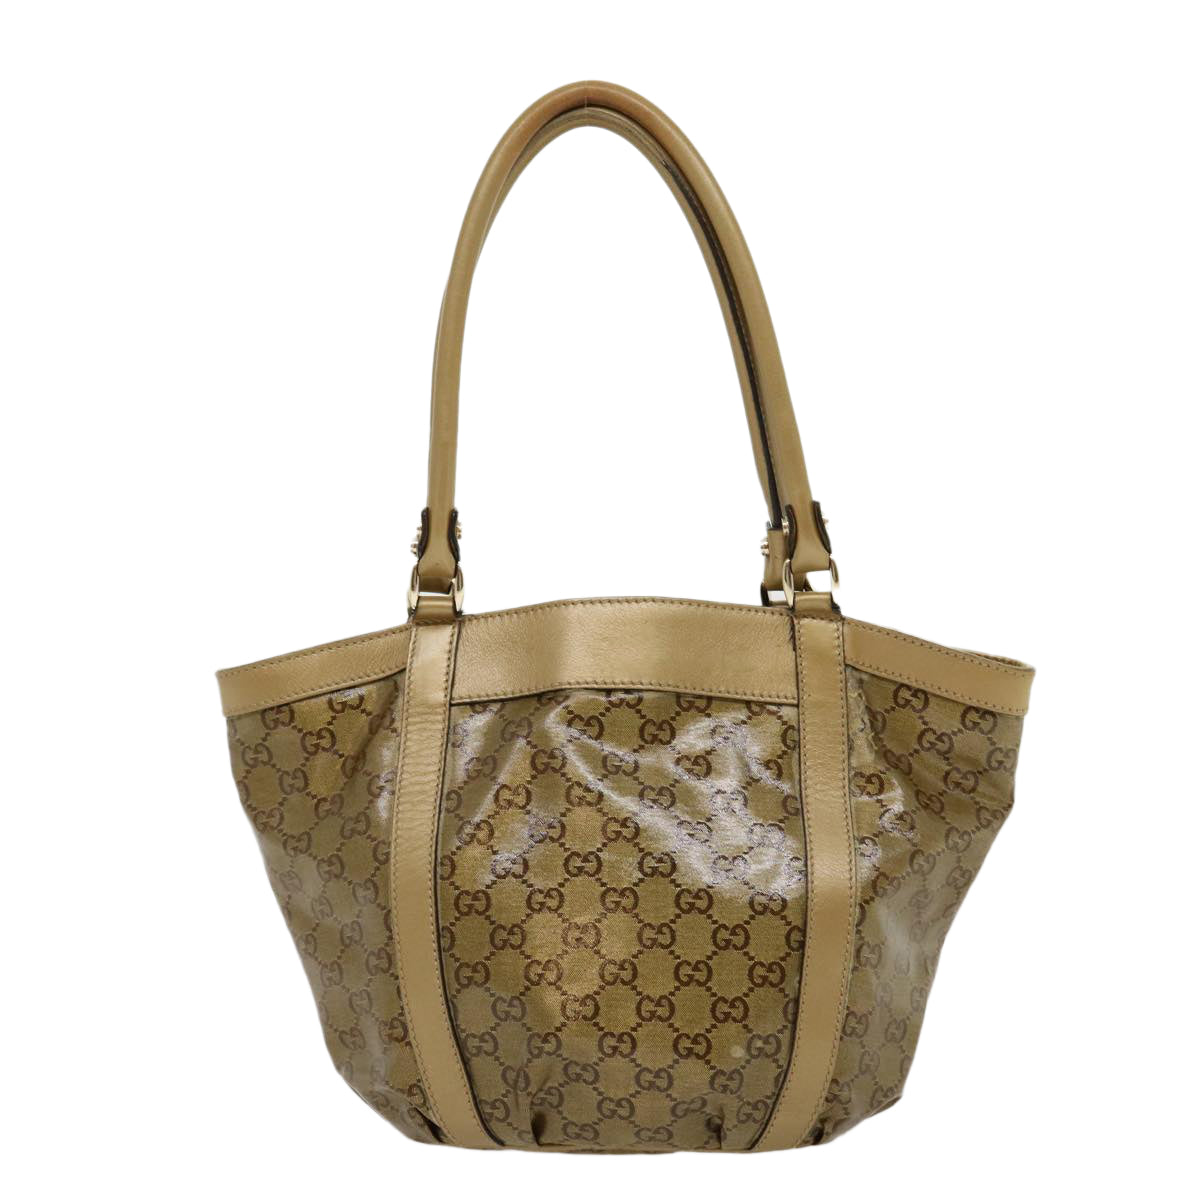 GUCCI GG Canvas Tote Bag Beige Gold 211983204991 Auth bs1798 - 0